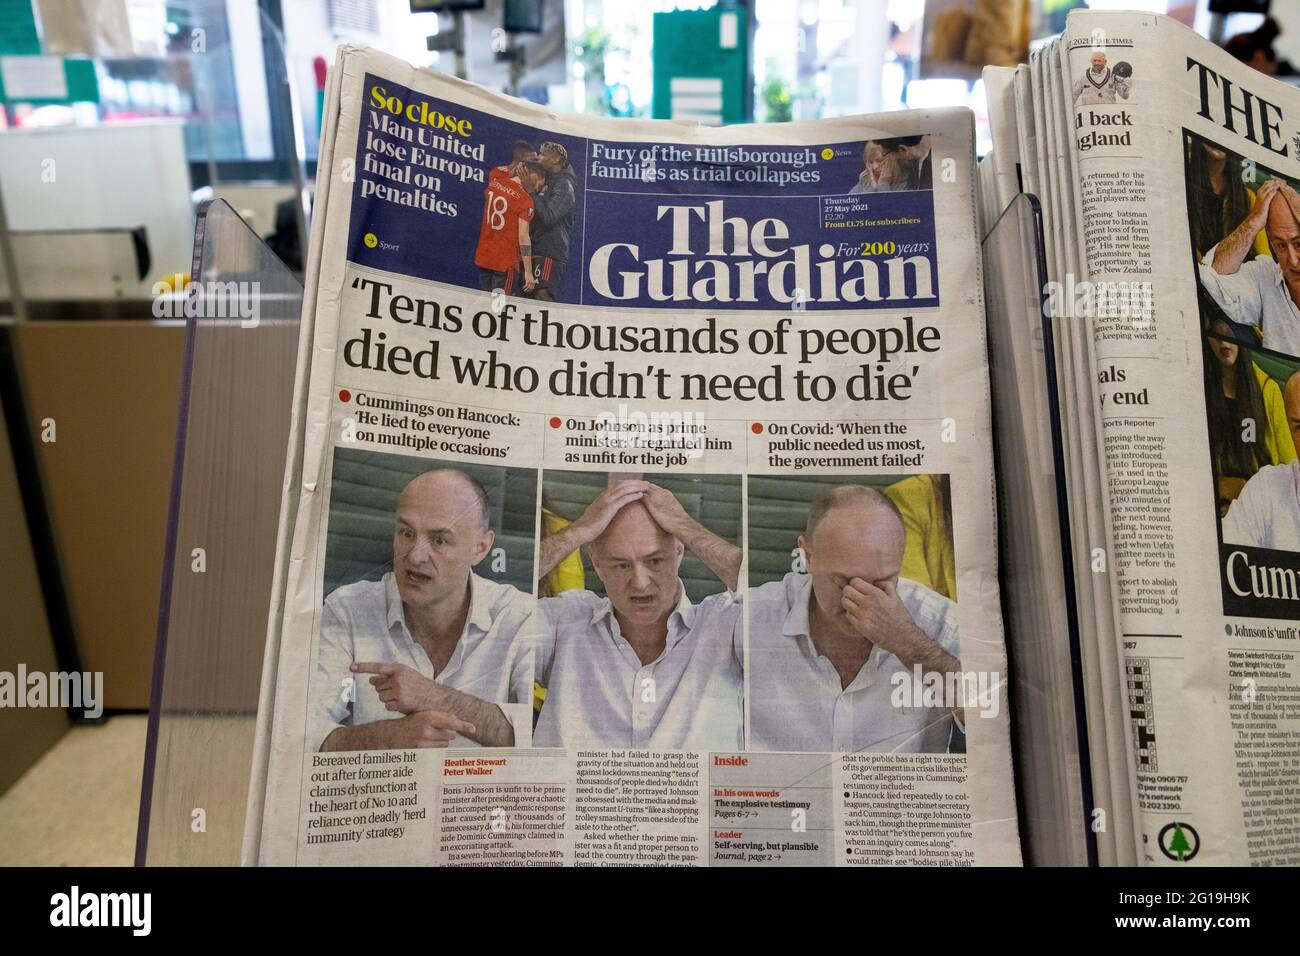 Dominic Cummings attack on government Guardian newspaper front page  'Tens of thousands of people died who didn't need to die' London UK 27 May 2021 Stock Photo